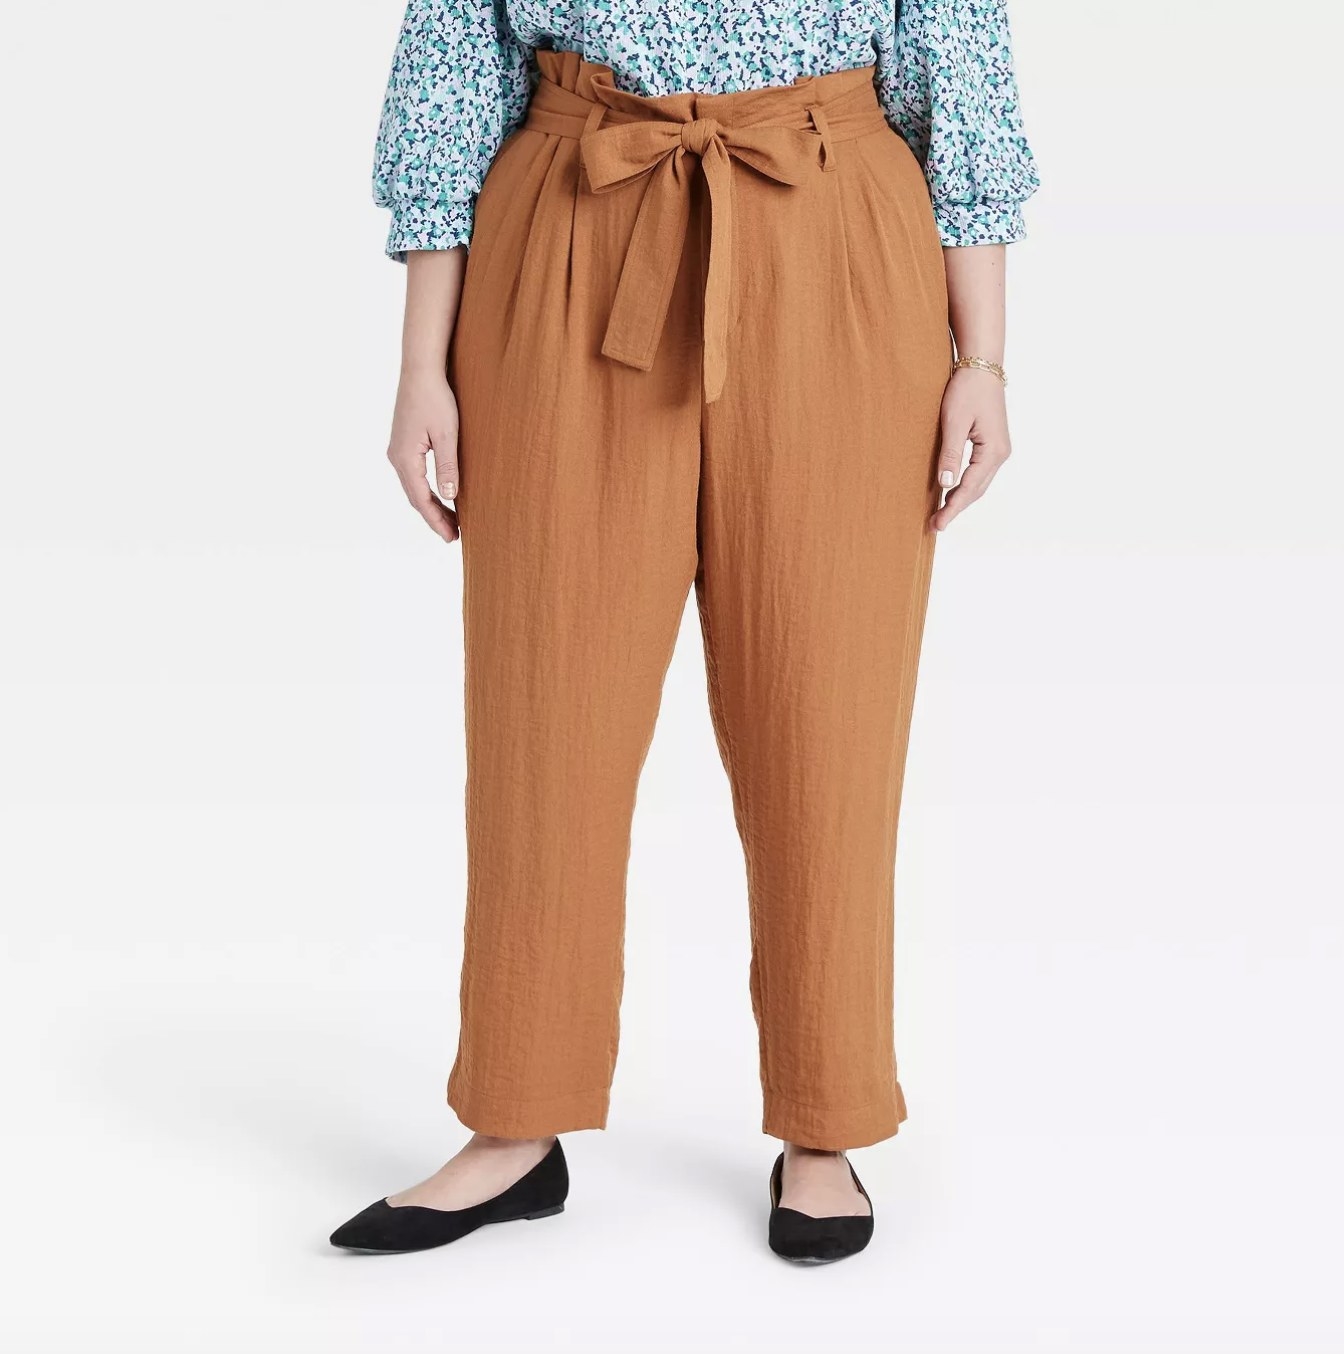 a model wearing the pants in brown